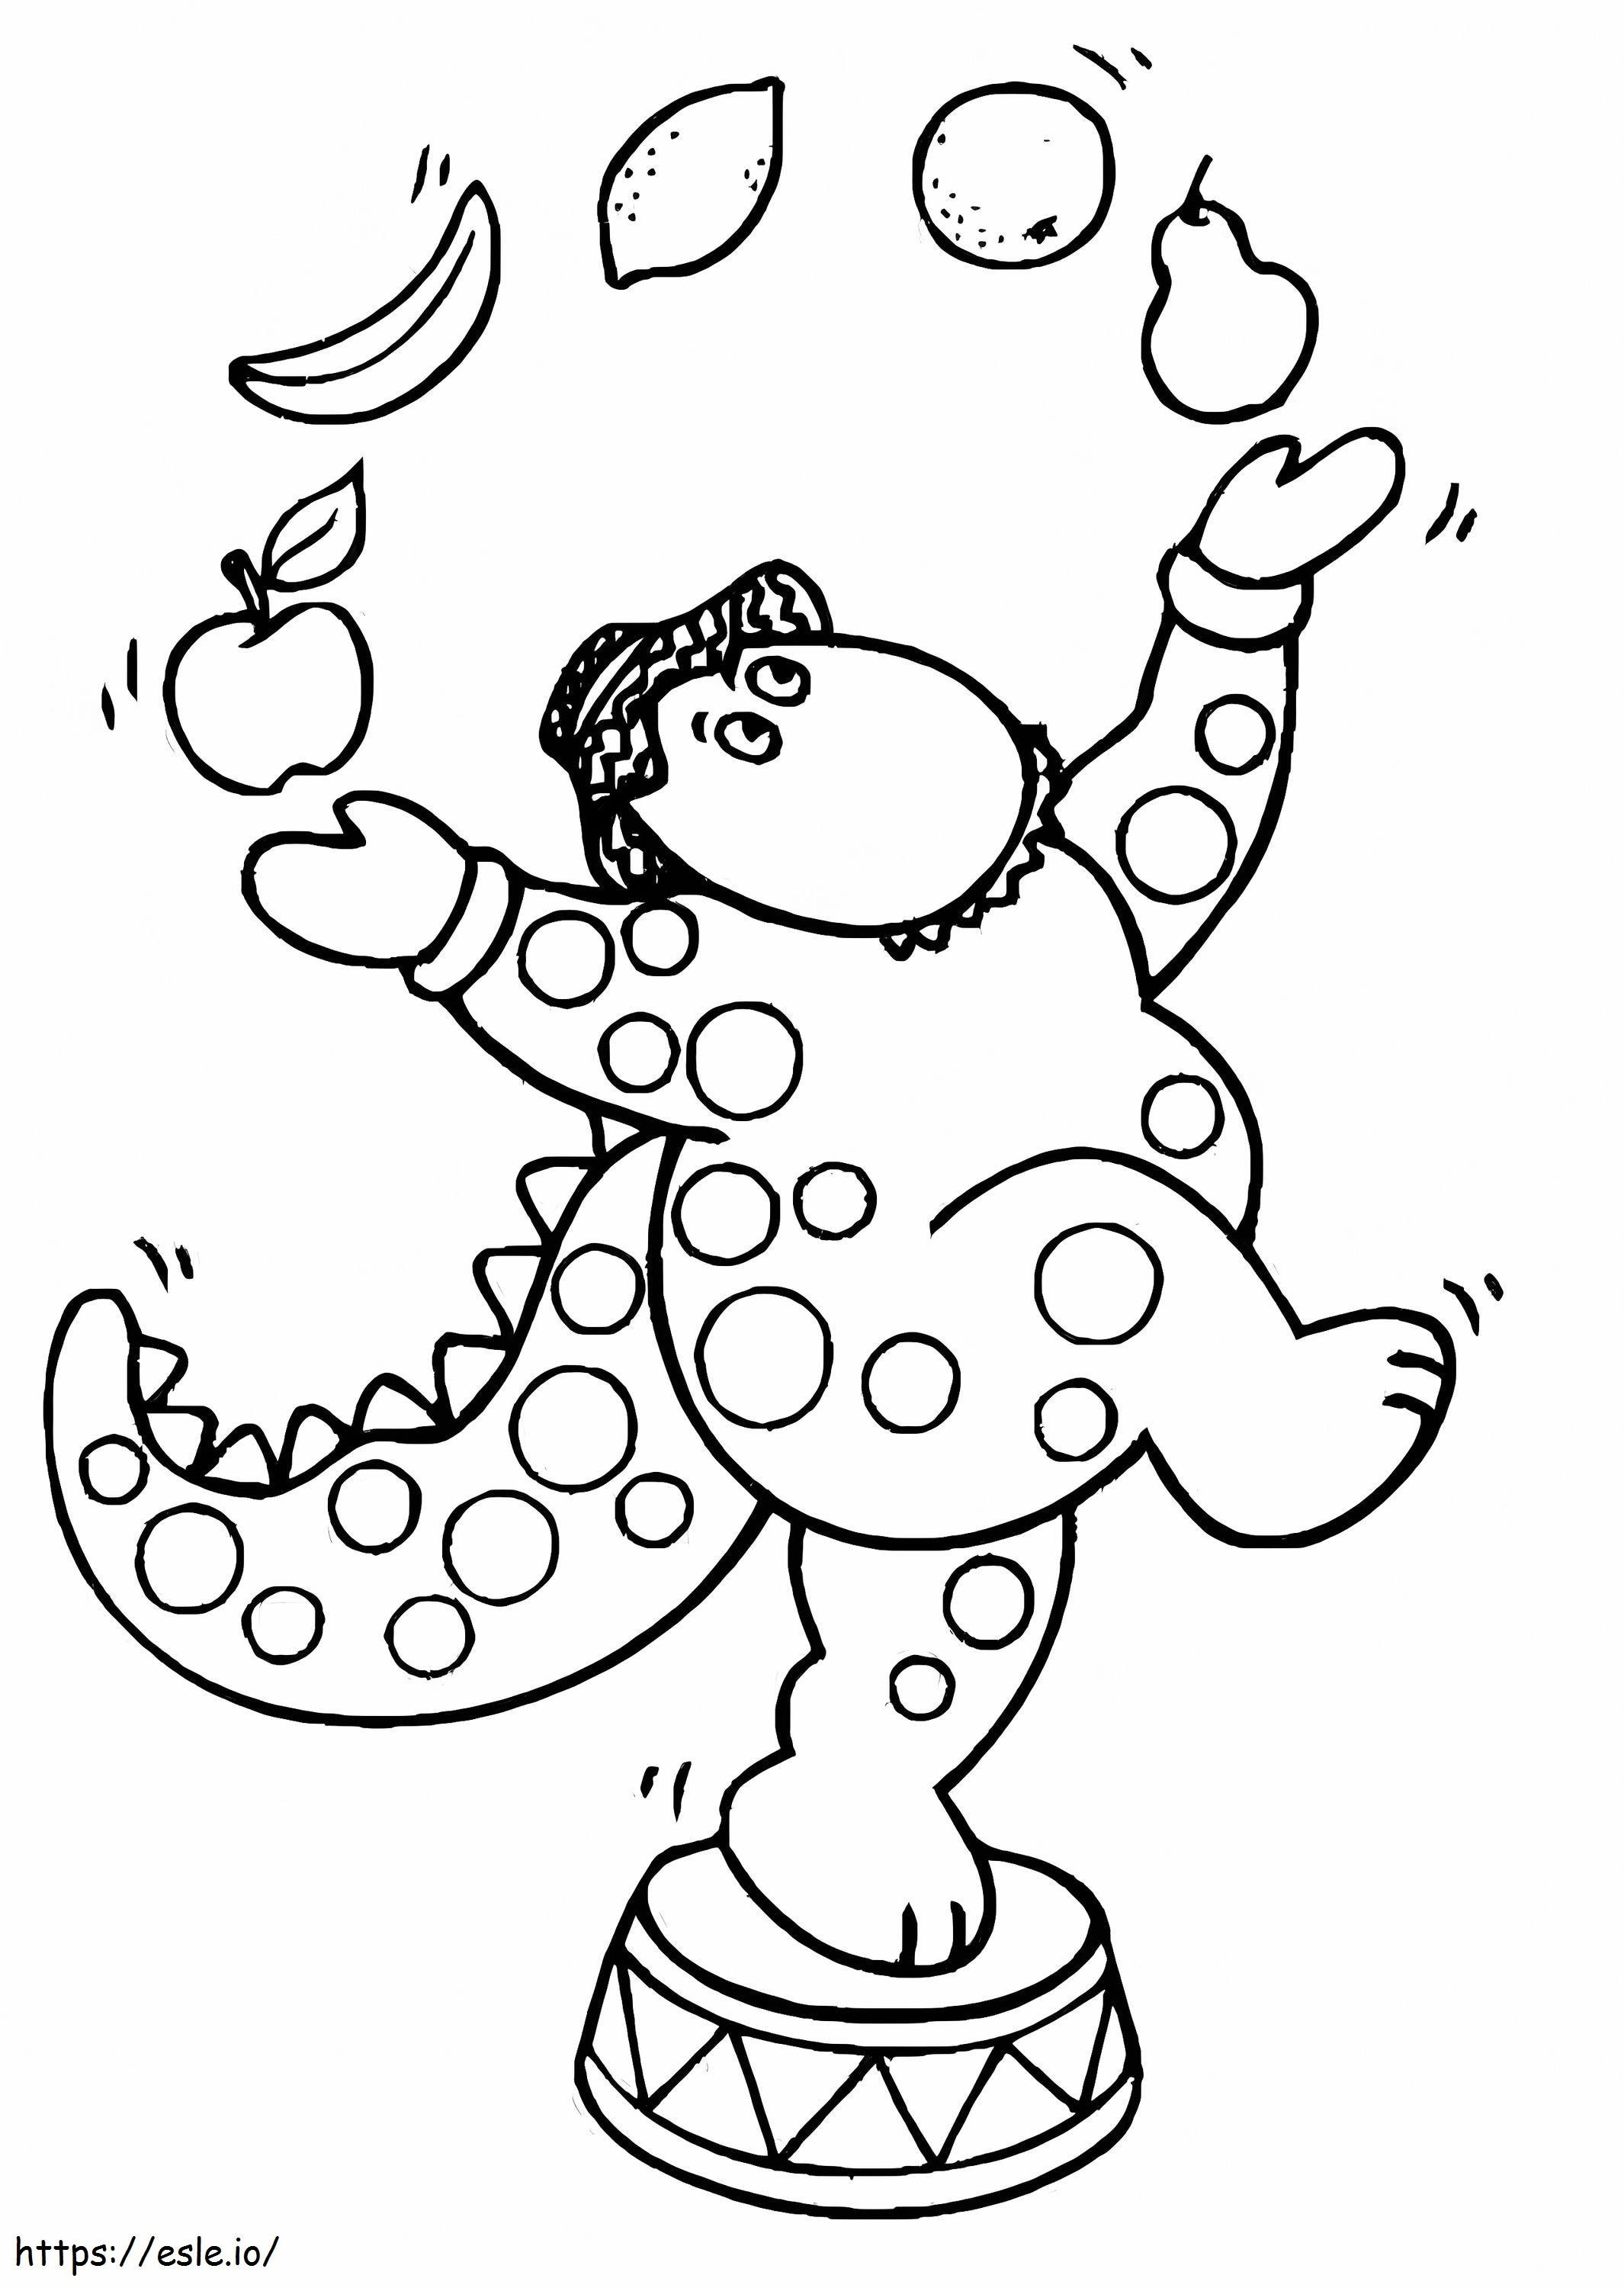 Wiggles 2 coloring page